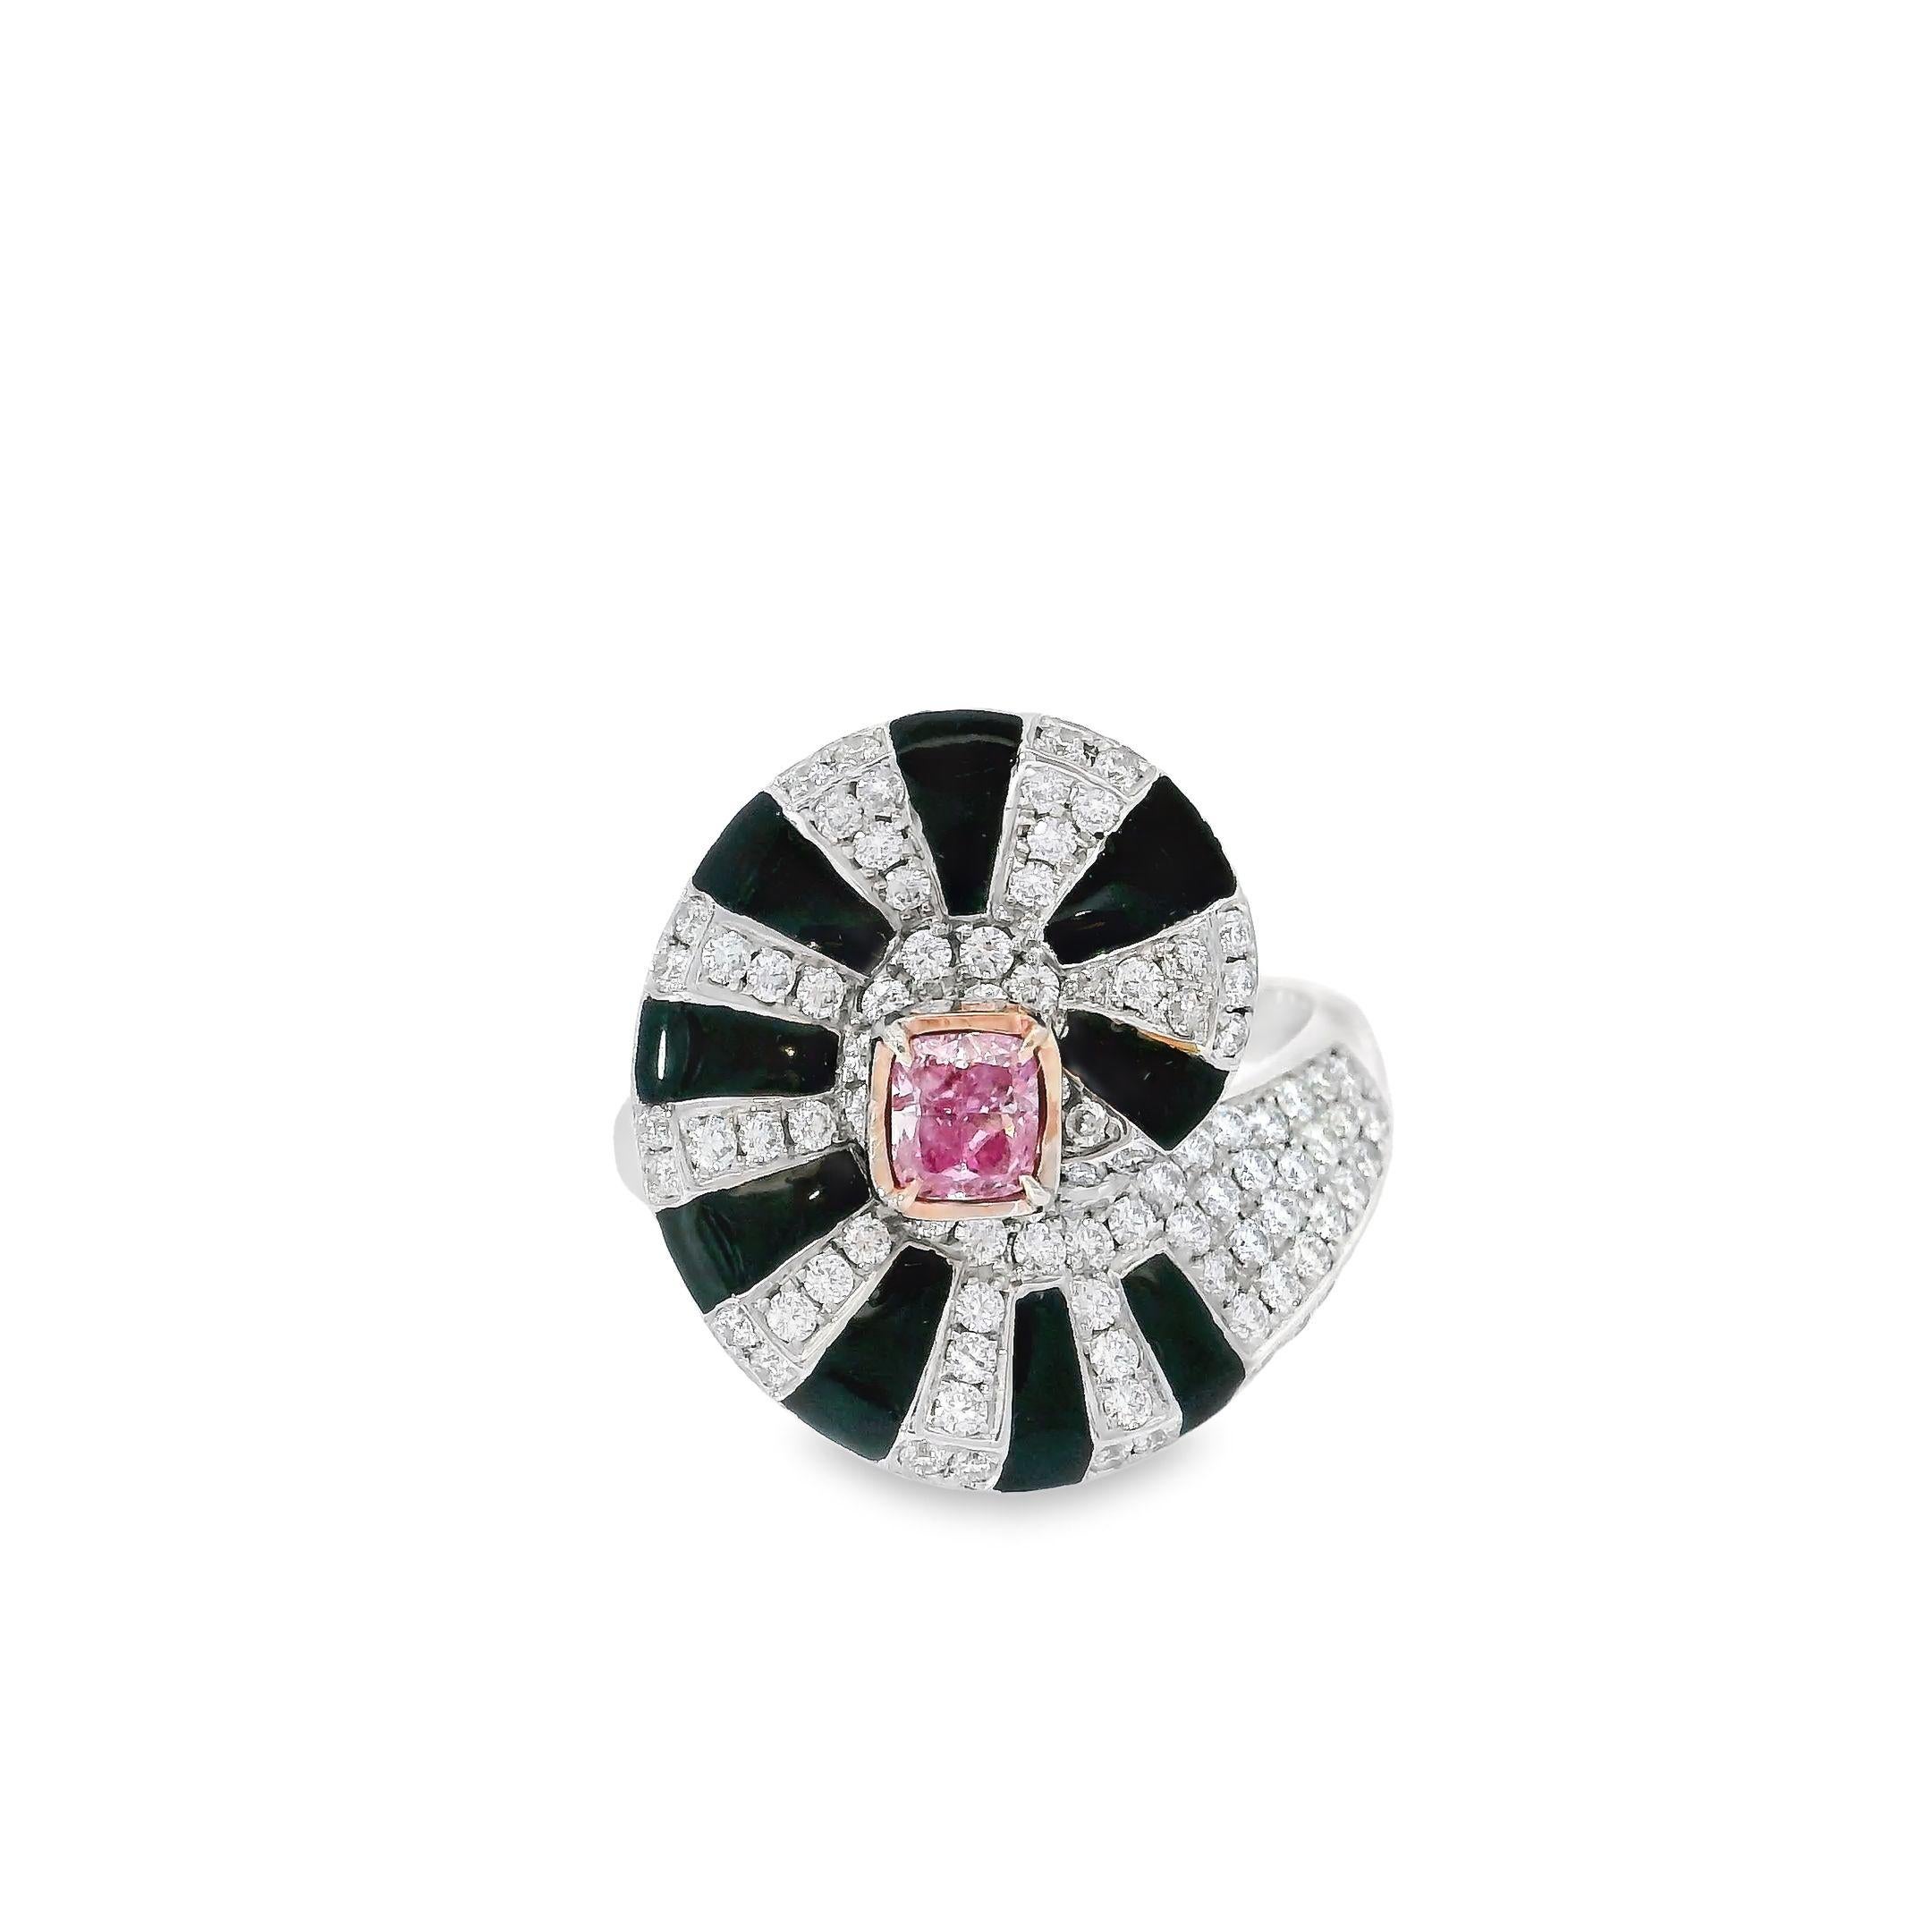 **100% NATURAL FANCY COLOUR DIAMOND JEWELRY**

✪ Jewelry Details ✪

♦ MAIN STONE DETAILS

➛ Stone Shape: Cushion
➛ Stone Color: Faint Pink
➛ Stone Weight: 0.27 carats
➛ Clarity: VS2
➛ GIA certified

♦ SIDE STONE DETAILS

➛ Side white diamonds - 106